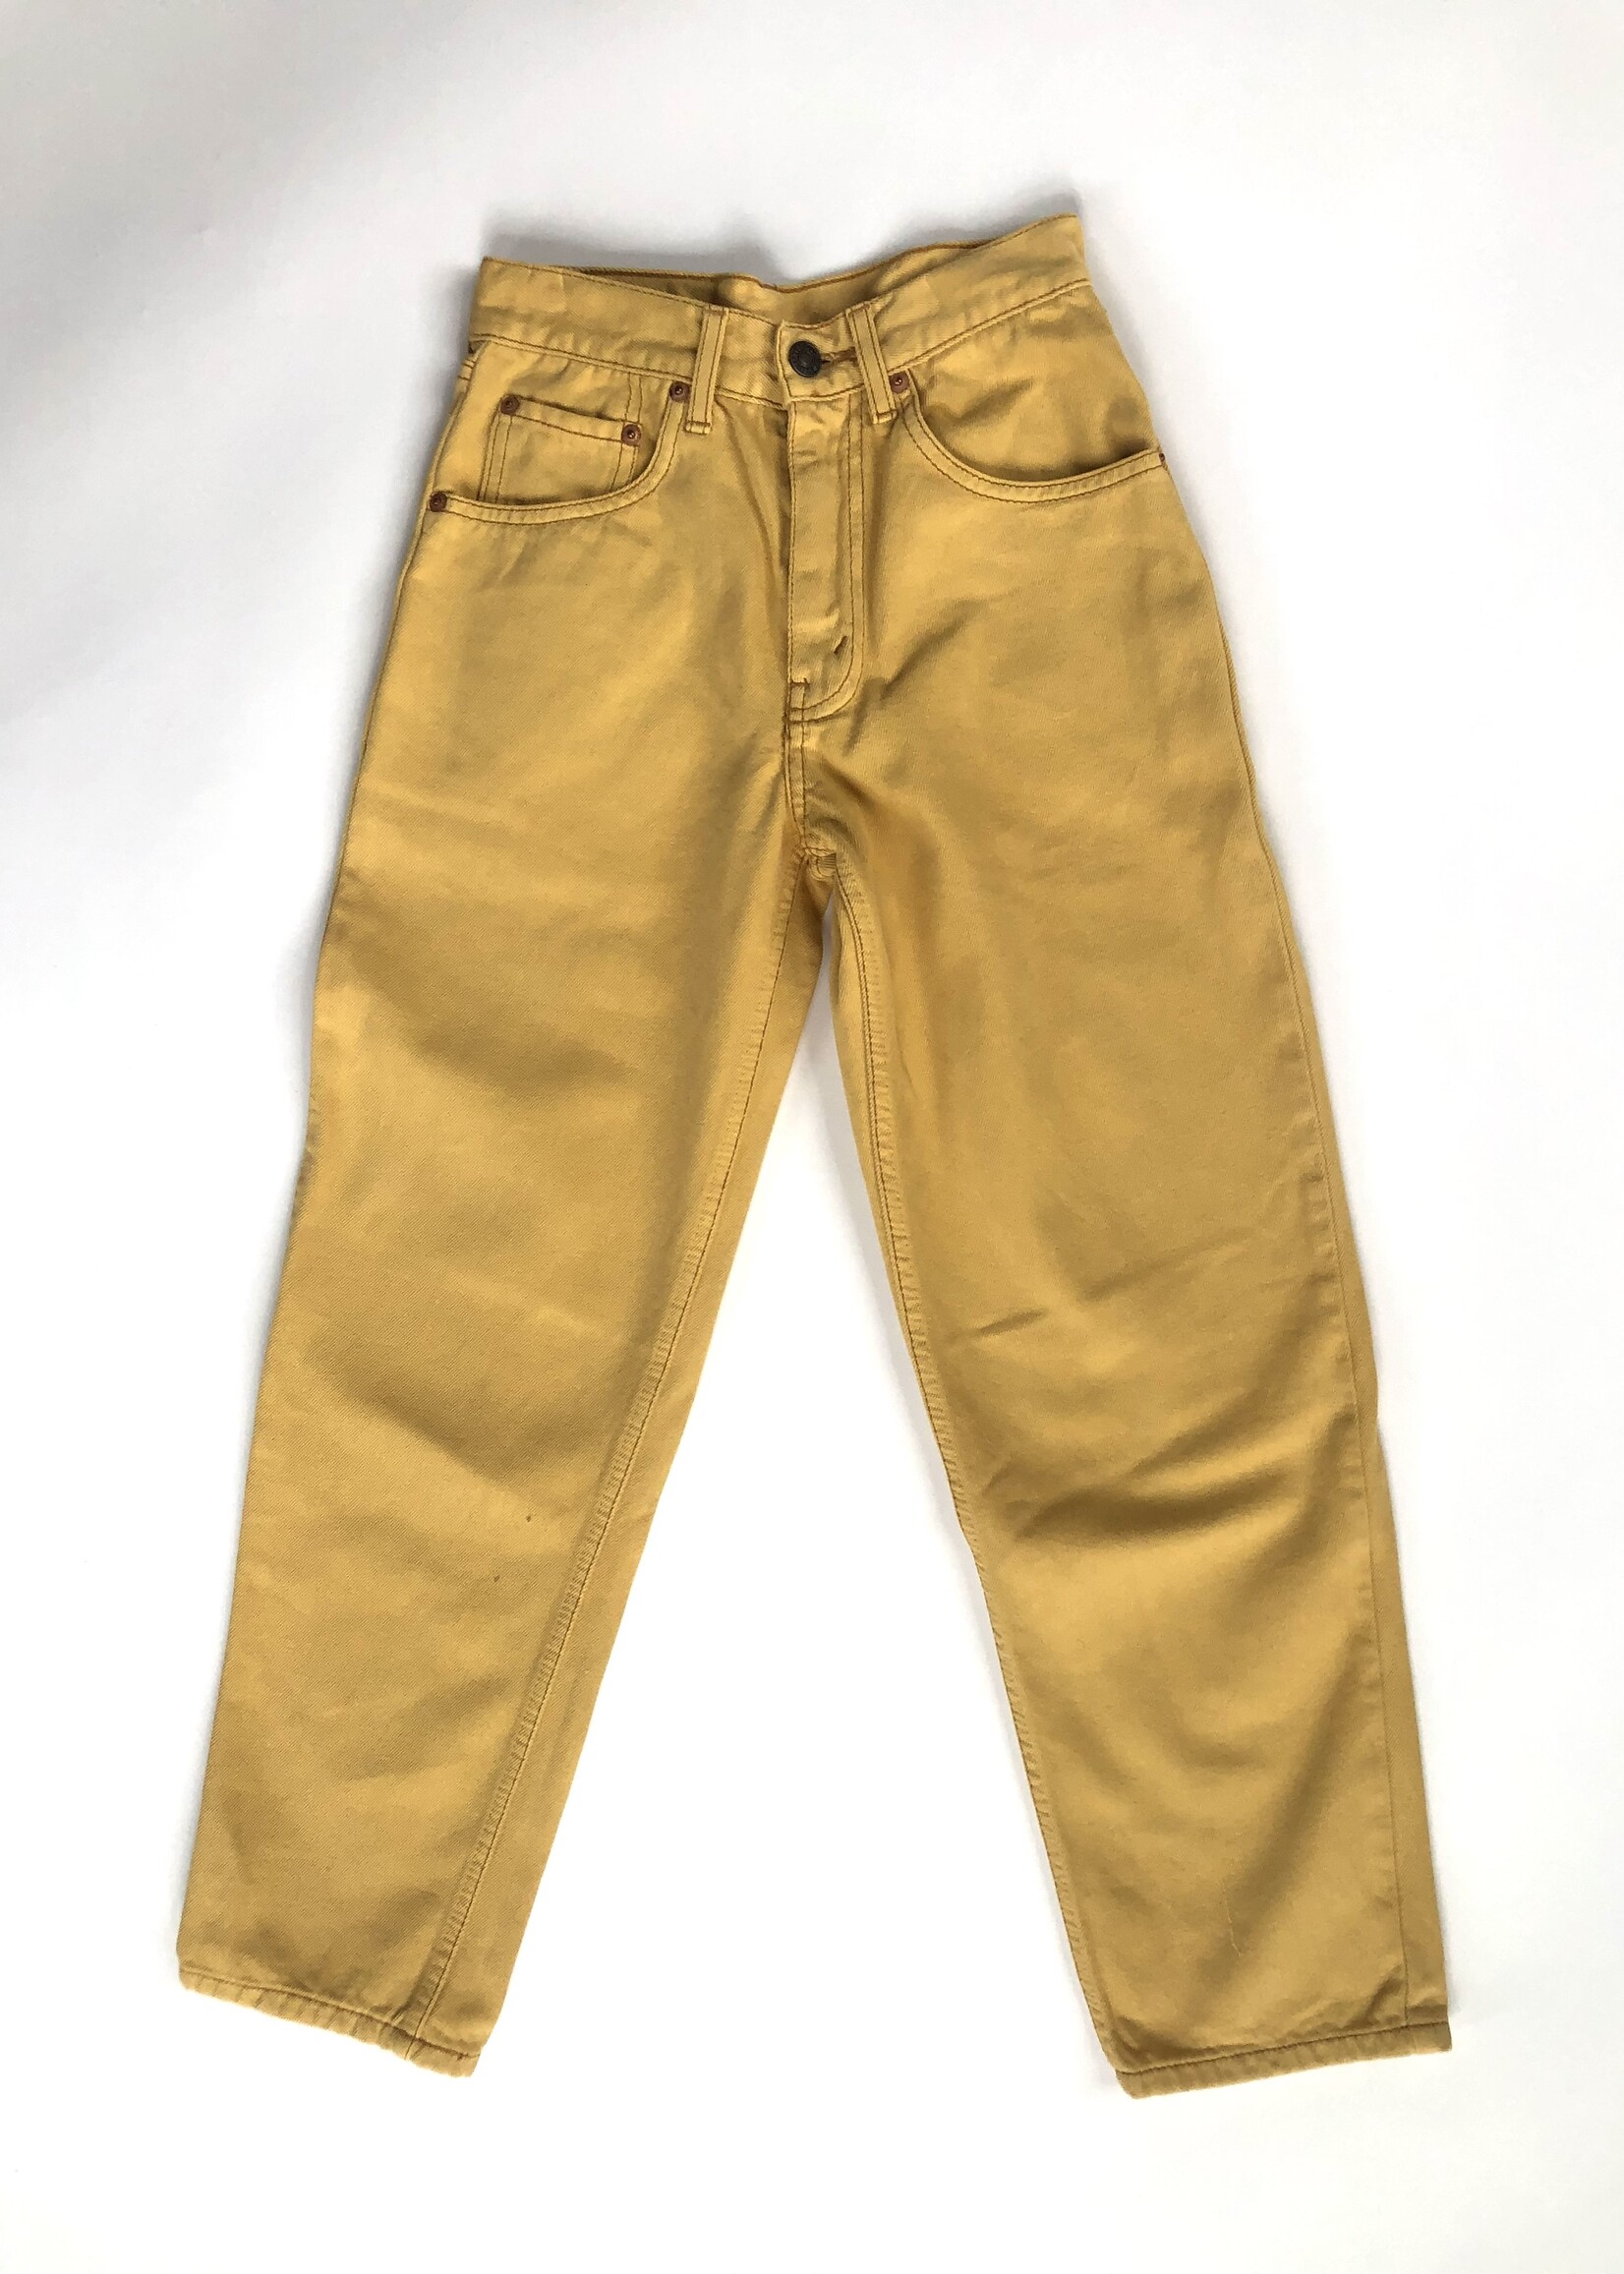 White Tab Yellow baggy jeans 9-10y